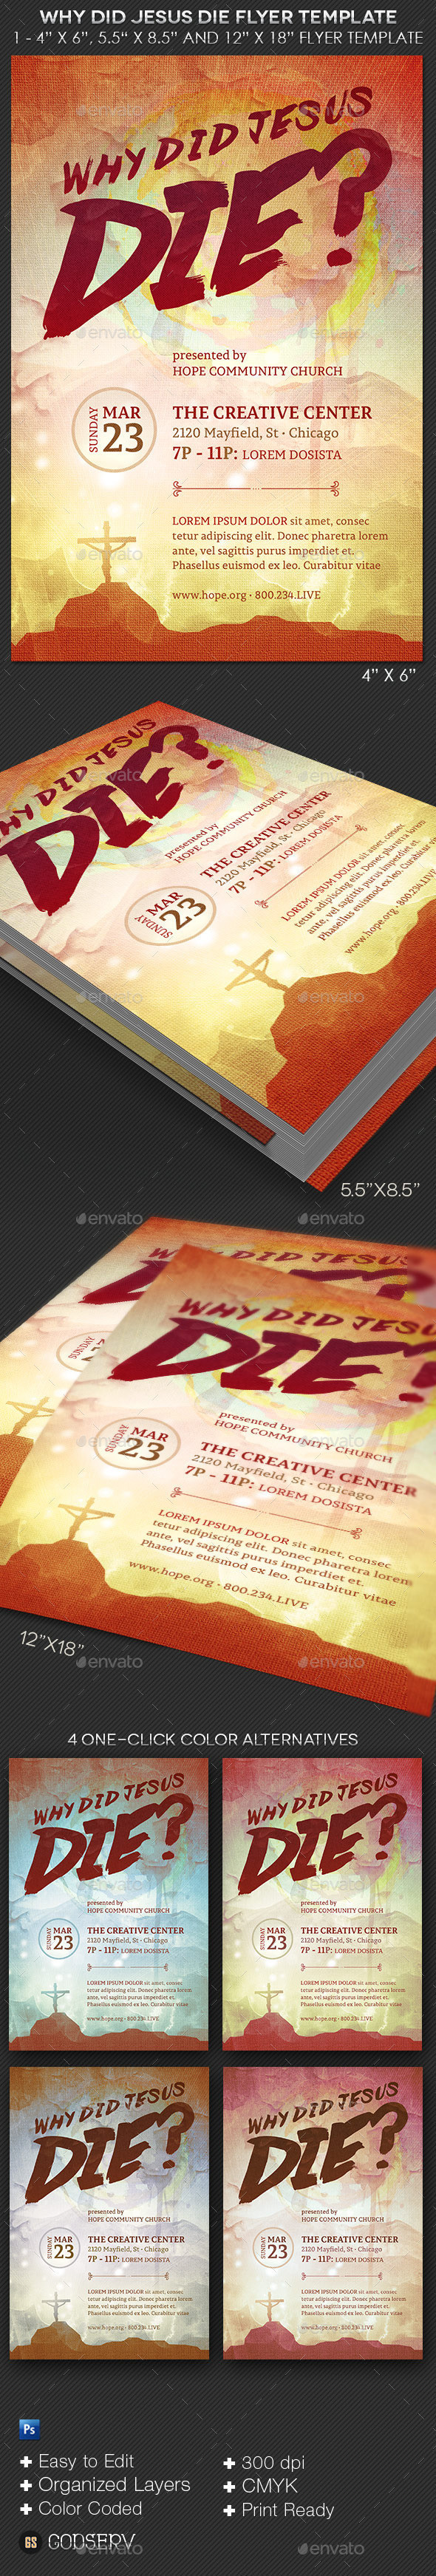 Why did jesus die flyer template  preview